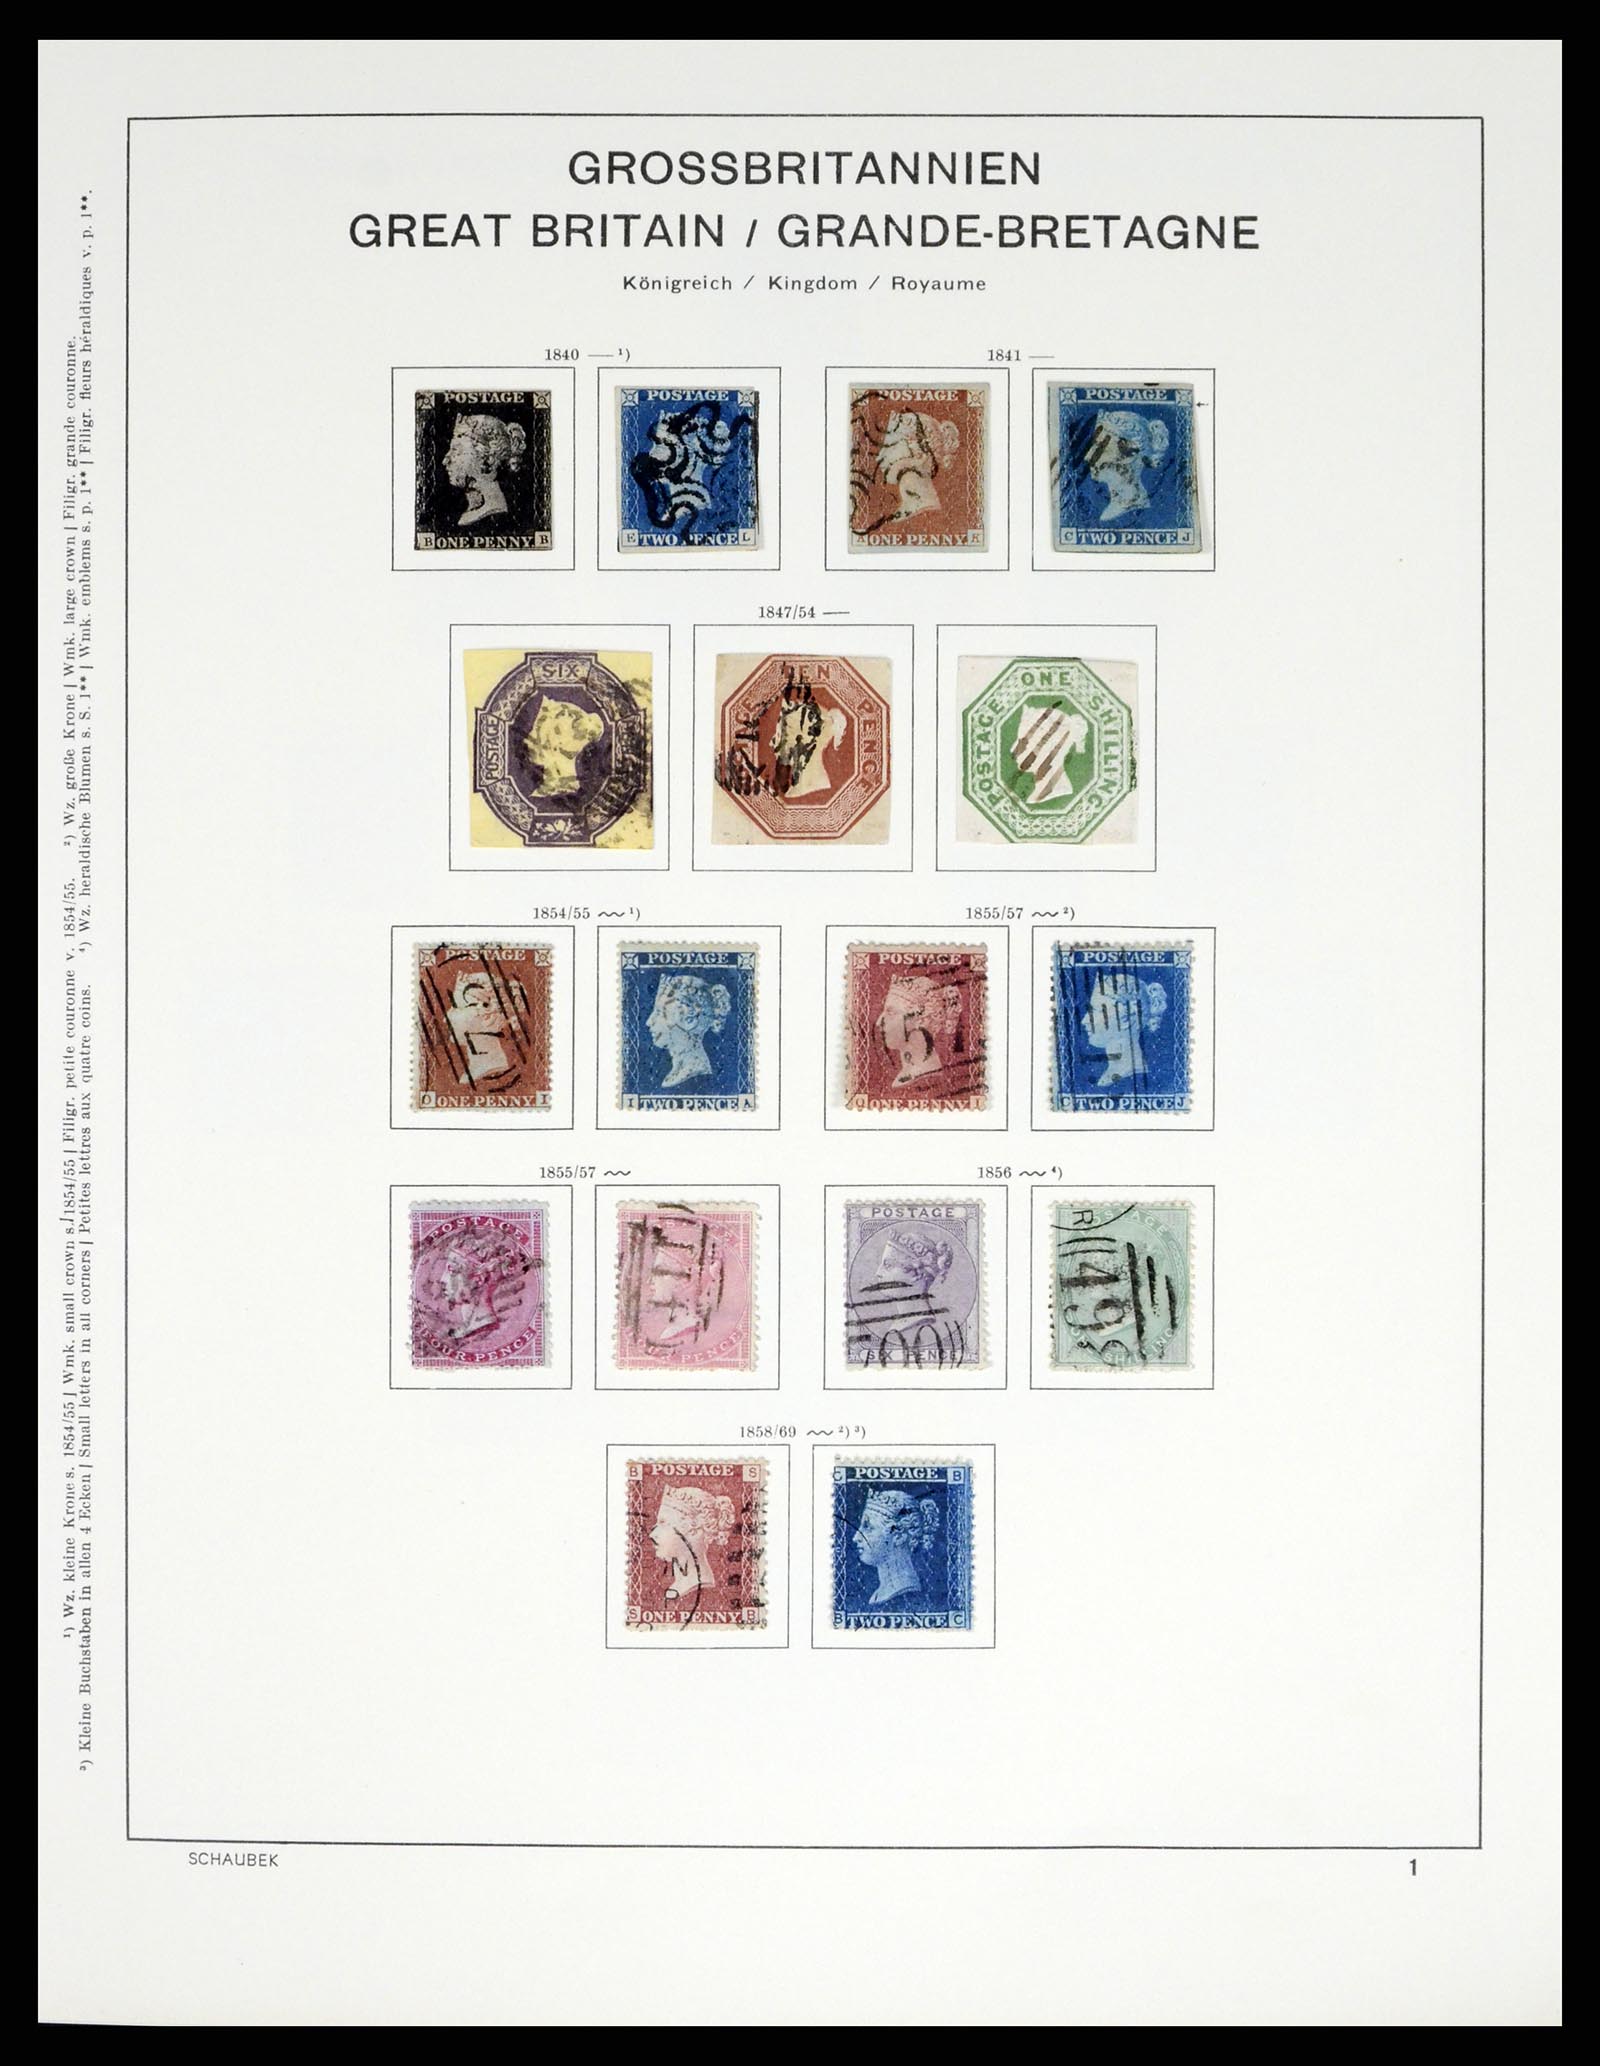 37585 001 - Stamp collection 37585 Great Britain supercollection 1840-2015.